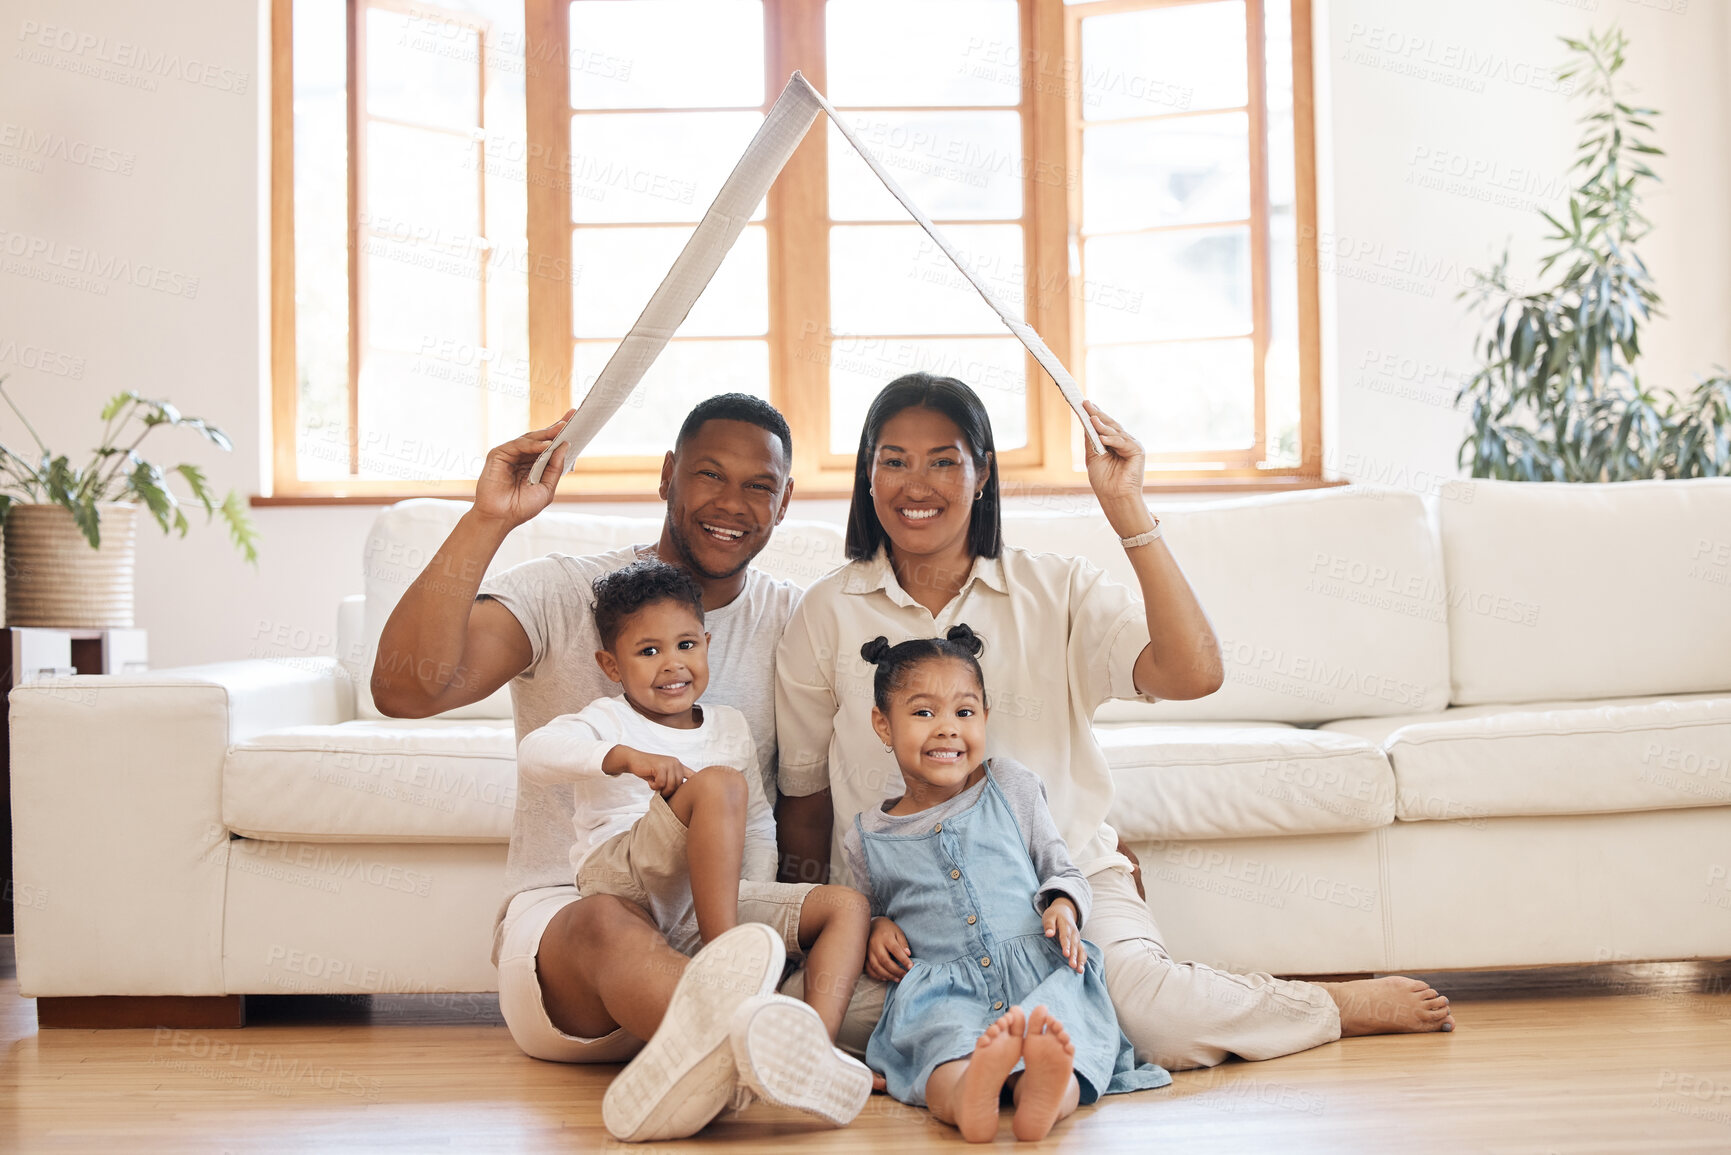 Buy stock photo Cheerful parents with two kids smiling and keeping roof mockup over heads in new home. Mixed race family with son and daughter sitting on floor in cozy living room during relocation